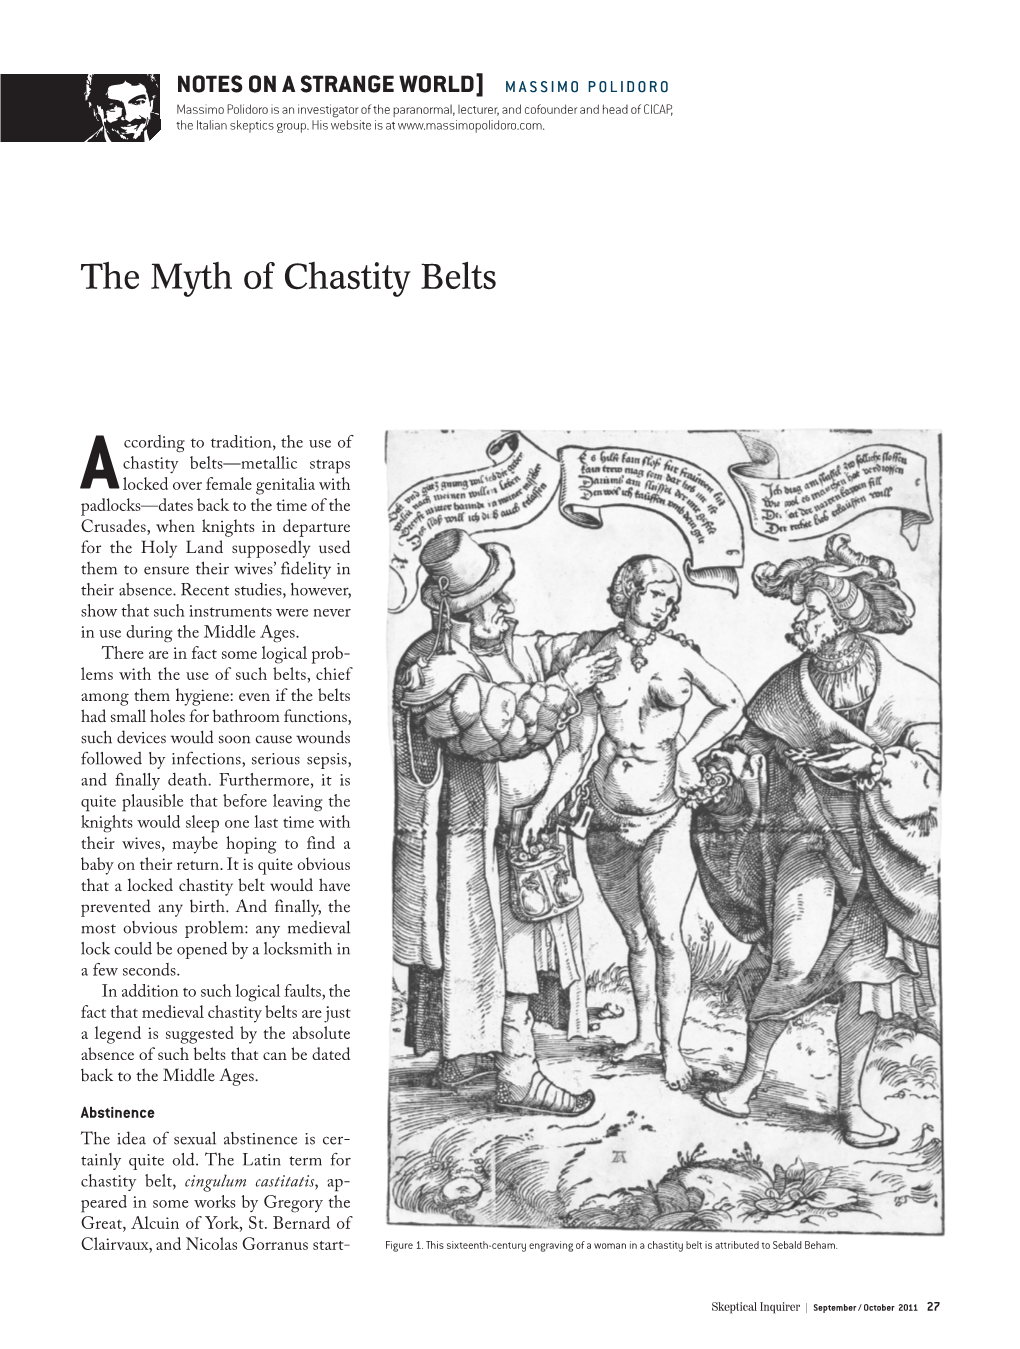 The Myth of Chastity Belts